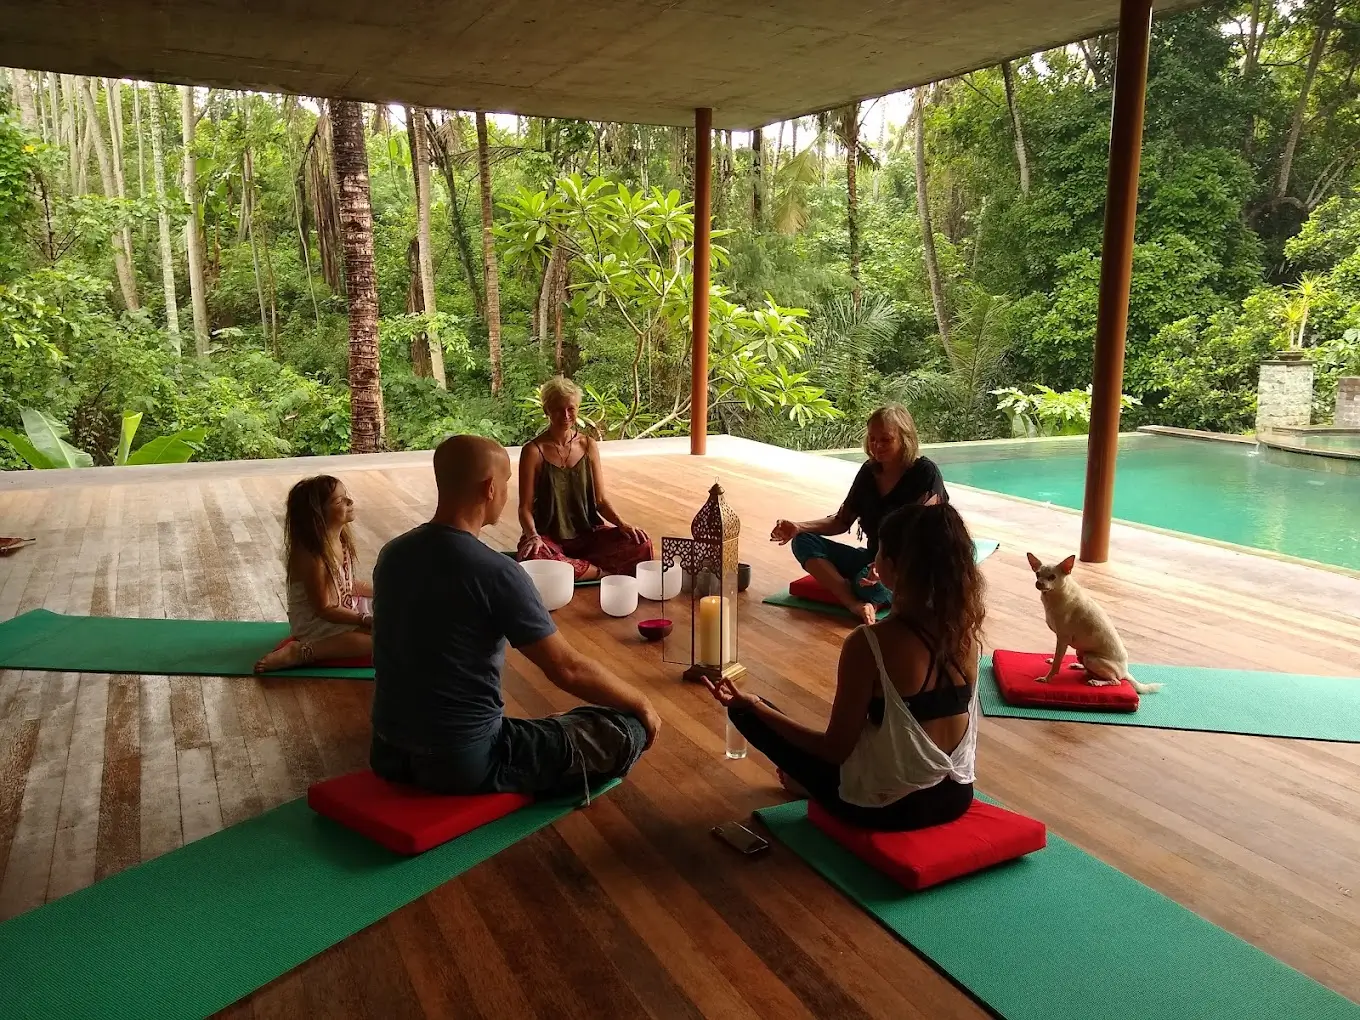 A group meditation session in an open yoga pavilion set against a backdrop of Bali's dense forests